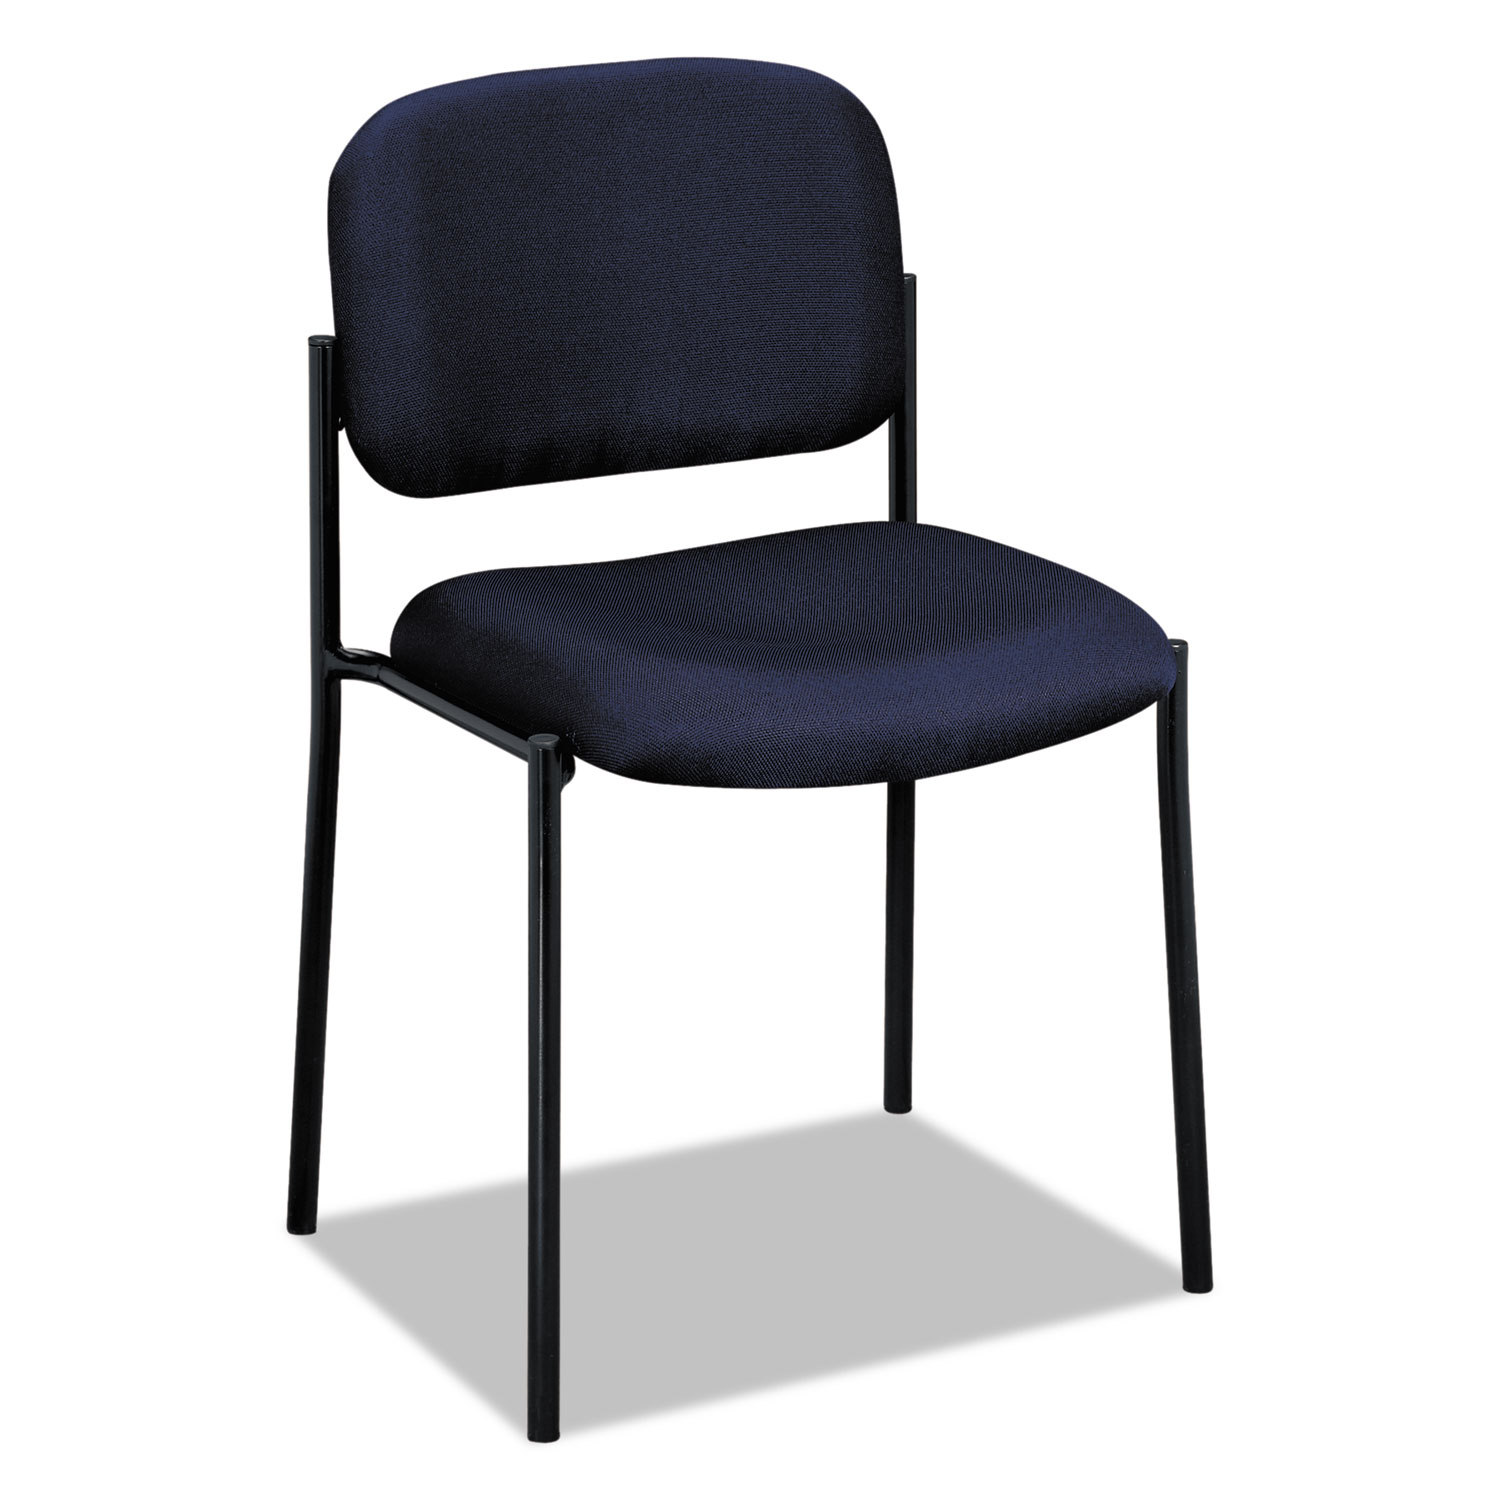  HON HVL606.VA90 VL606 Stacking Guest Chair without Arms, Navy Seat/Navy Back, Black Base (BSXVL606VA90) 